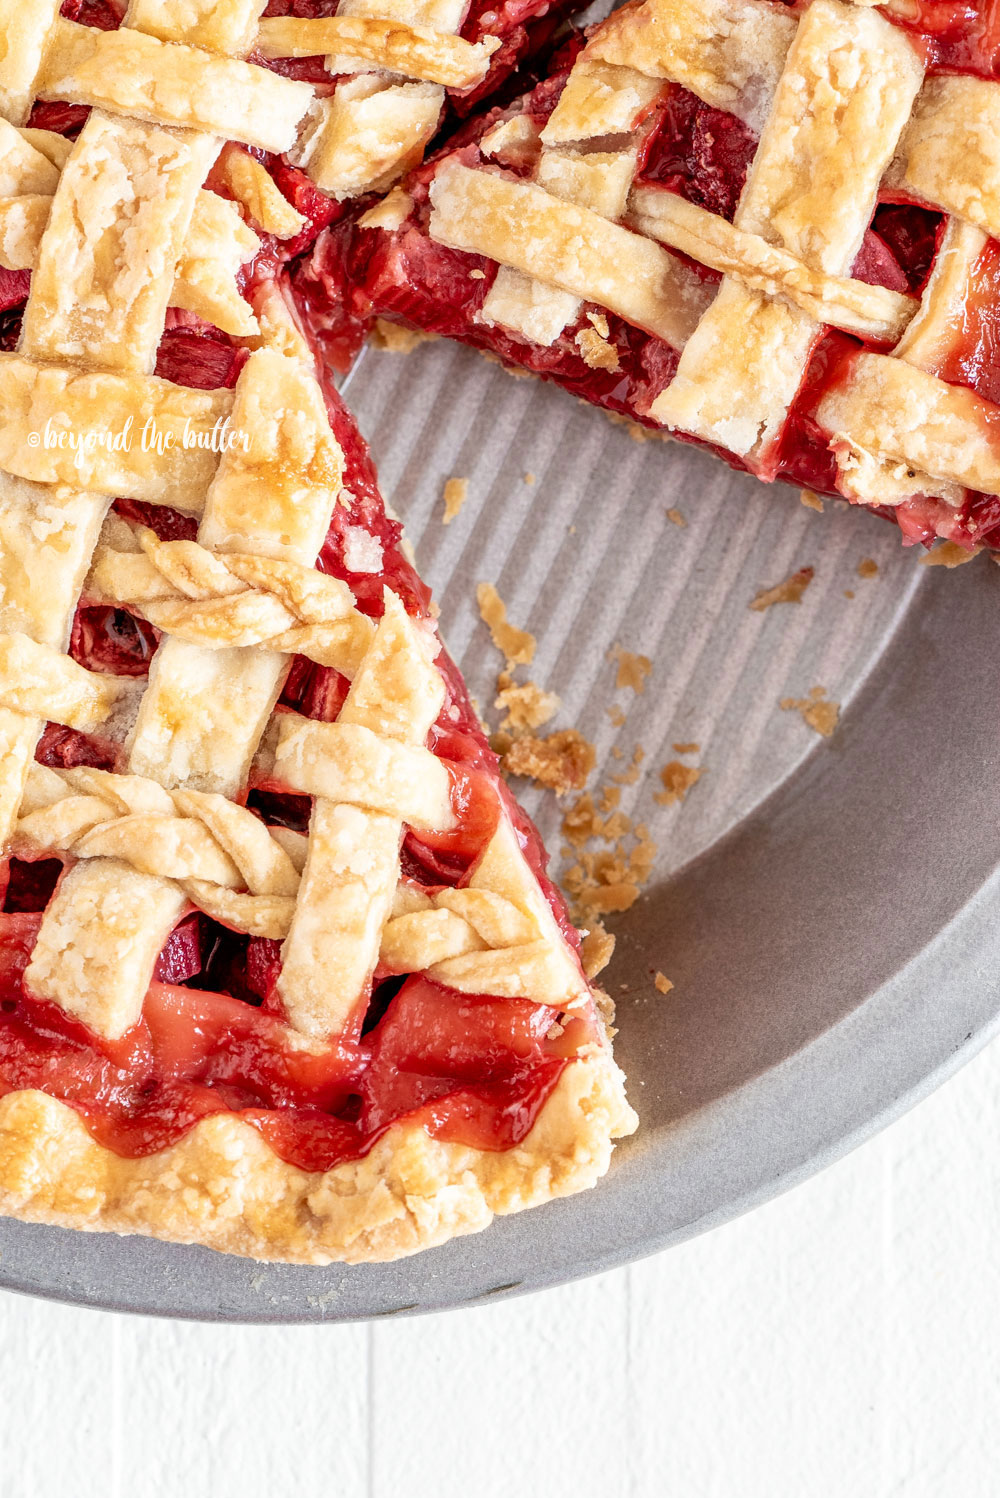 Overhead image of strawberry rhubarb pie with slice removed on white wood table.